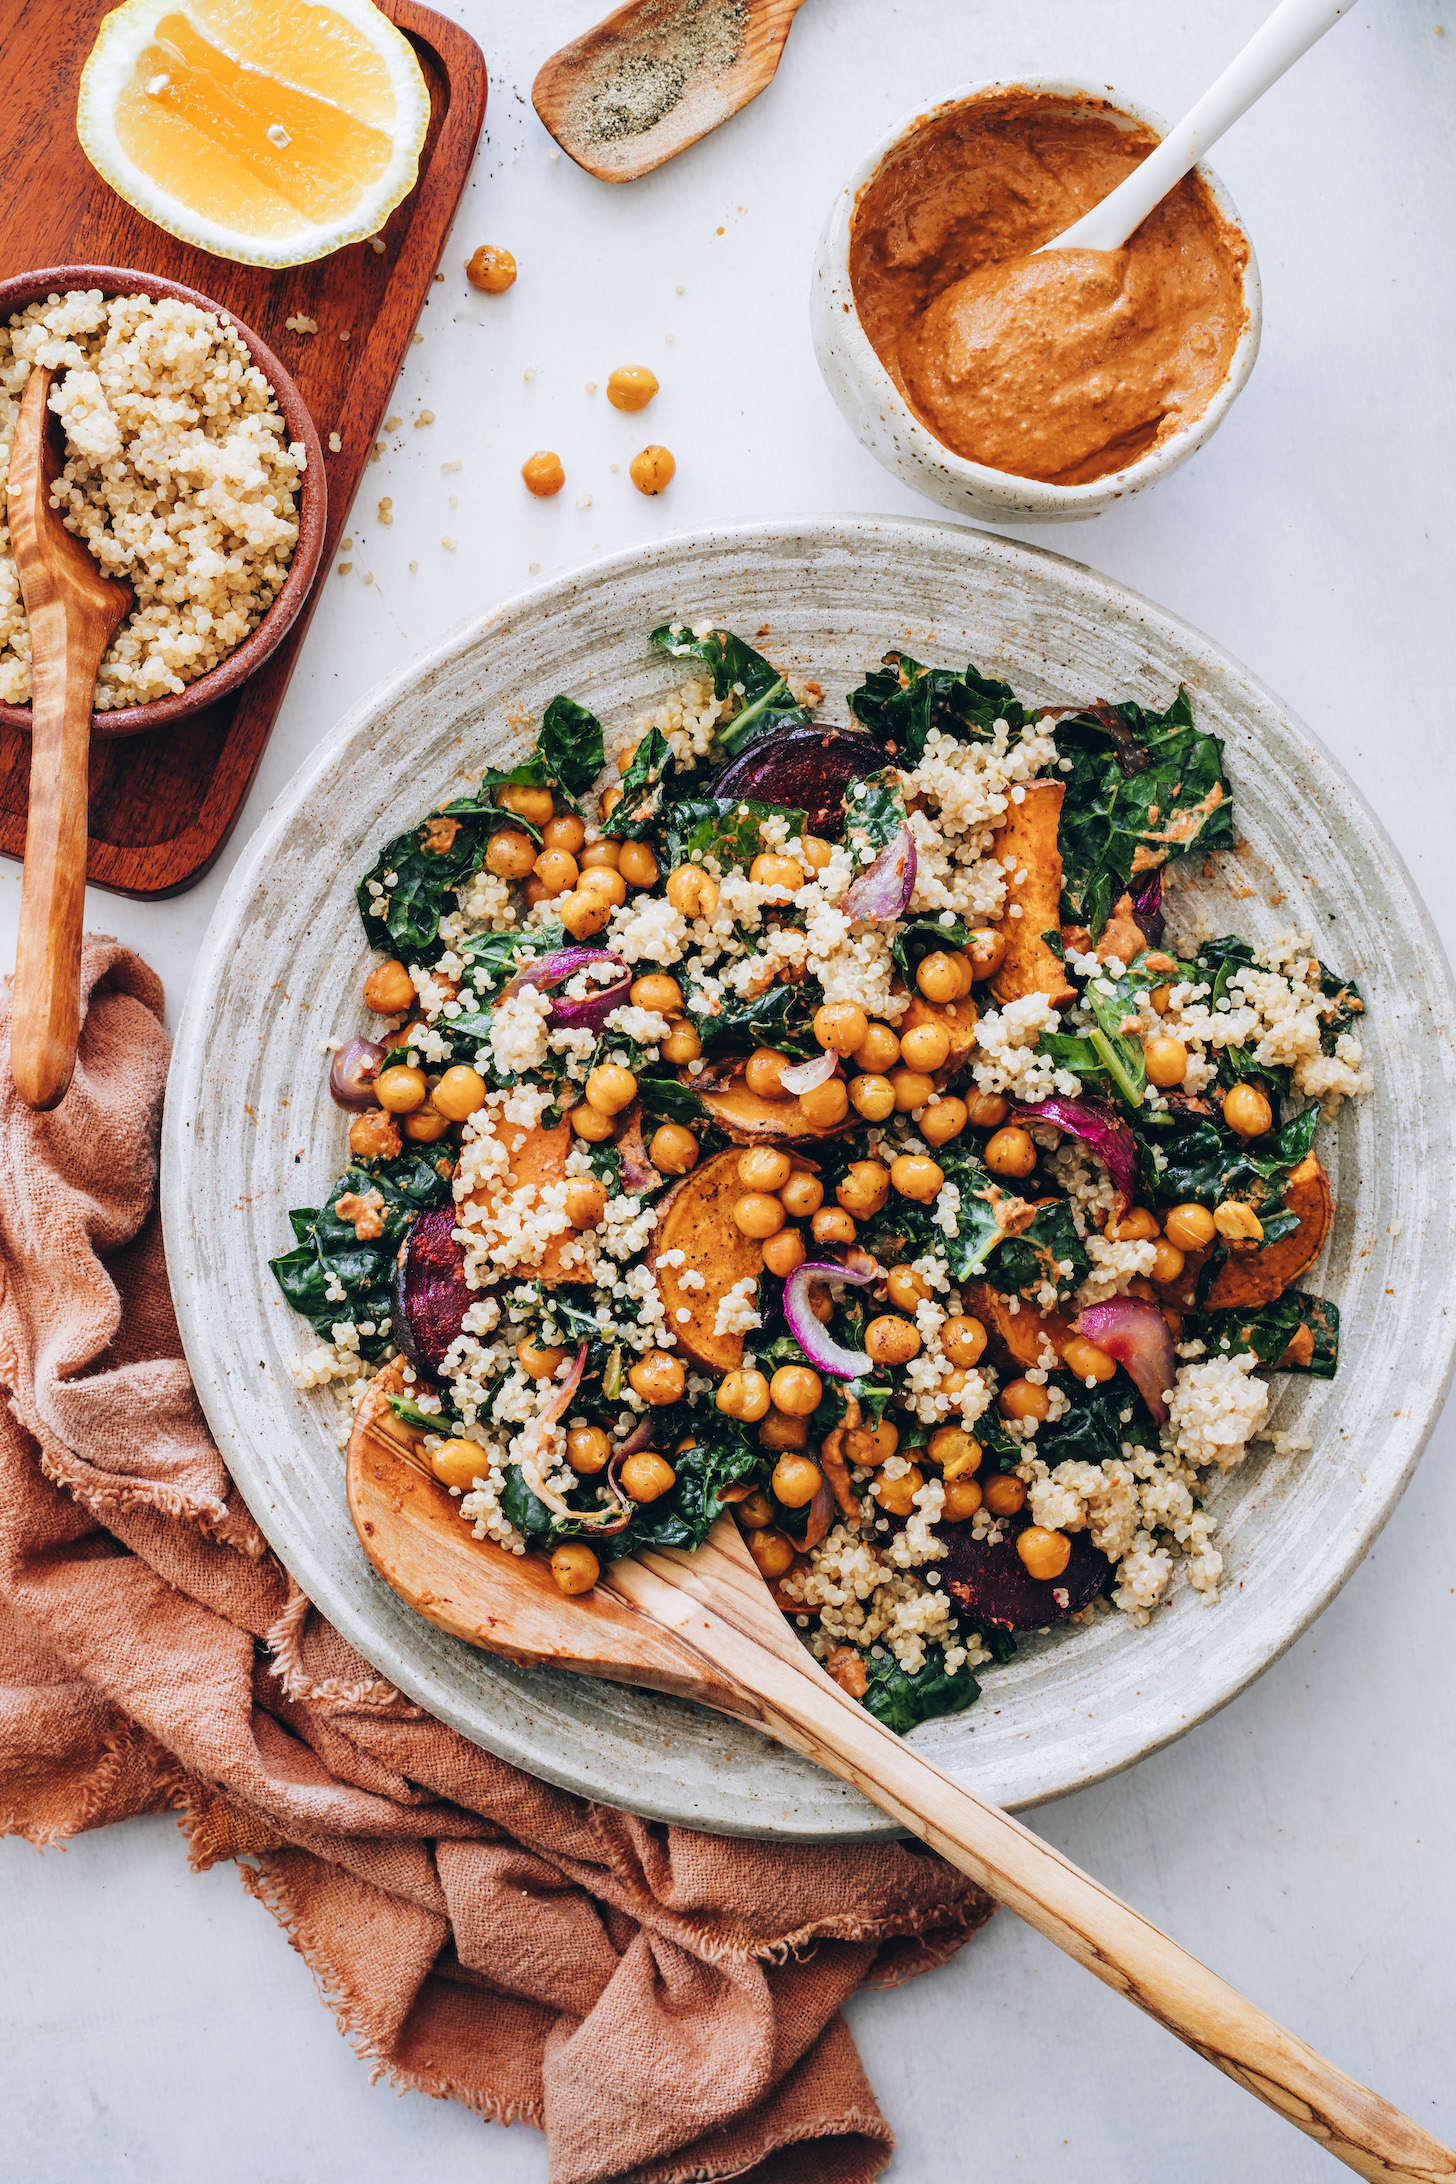 Bowls of quinoa and chipotle pecan pesto beside a hearty kale salad